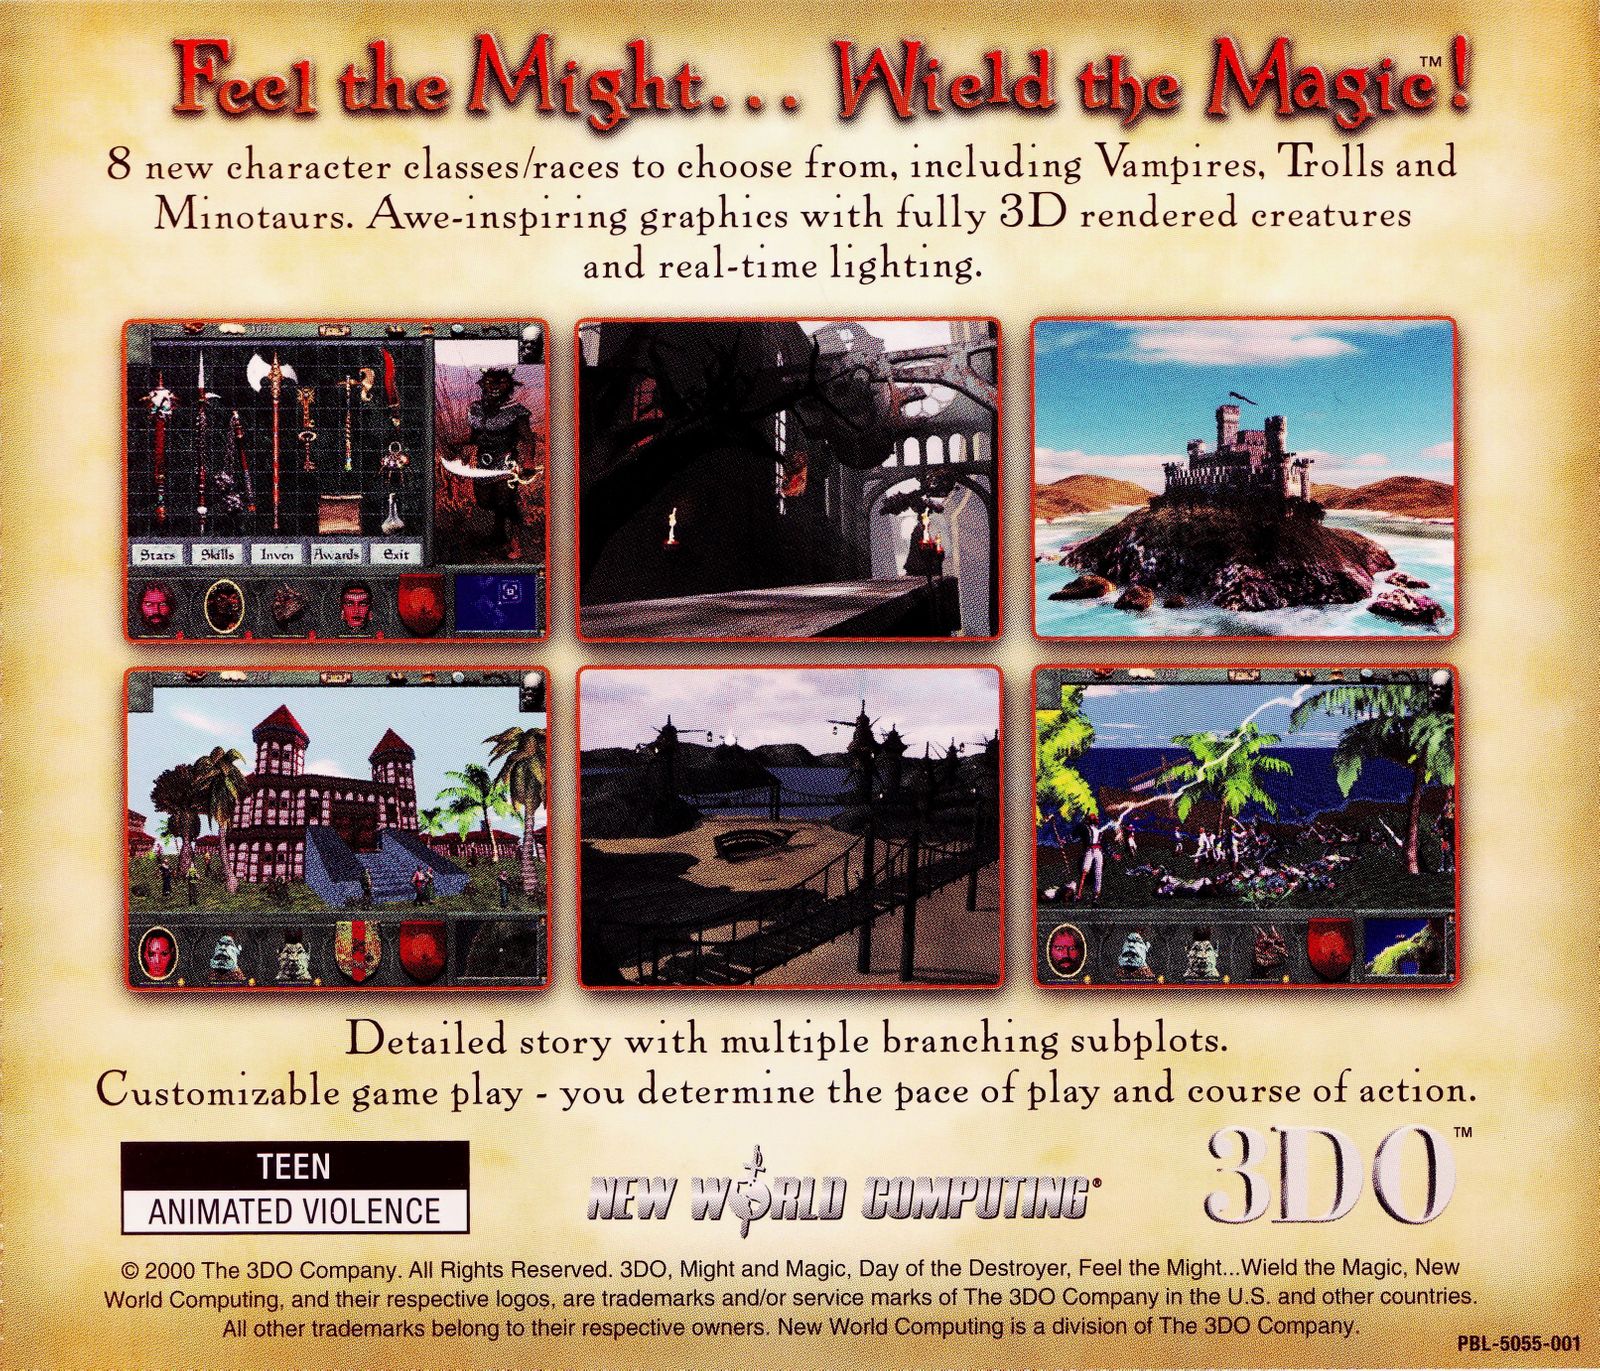 Might and magic day of the destroyer. Might and Magic 8 Day of the Destroyer. Might and Magic VIII Day of the Destroyer. Might and Magic VIII: Day of the Destroyer ps2. Might and Magic VIII: Day of the Destroyer лого.